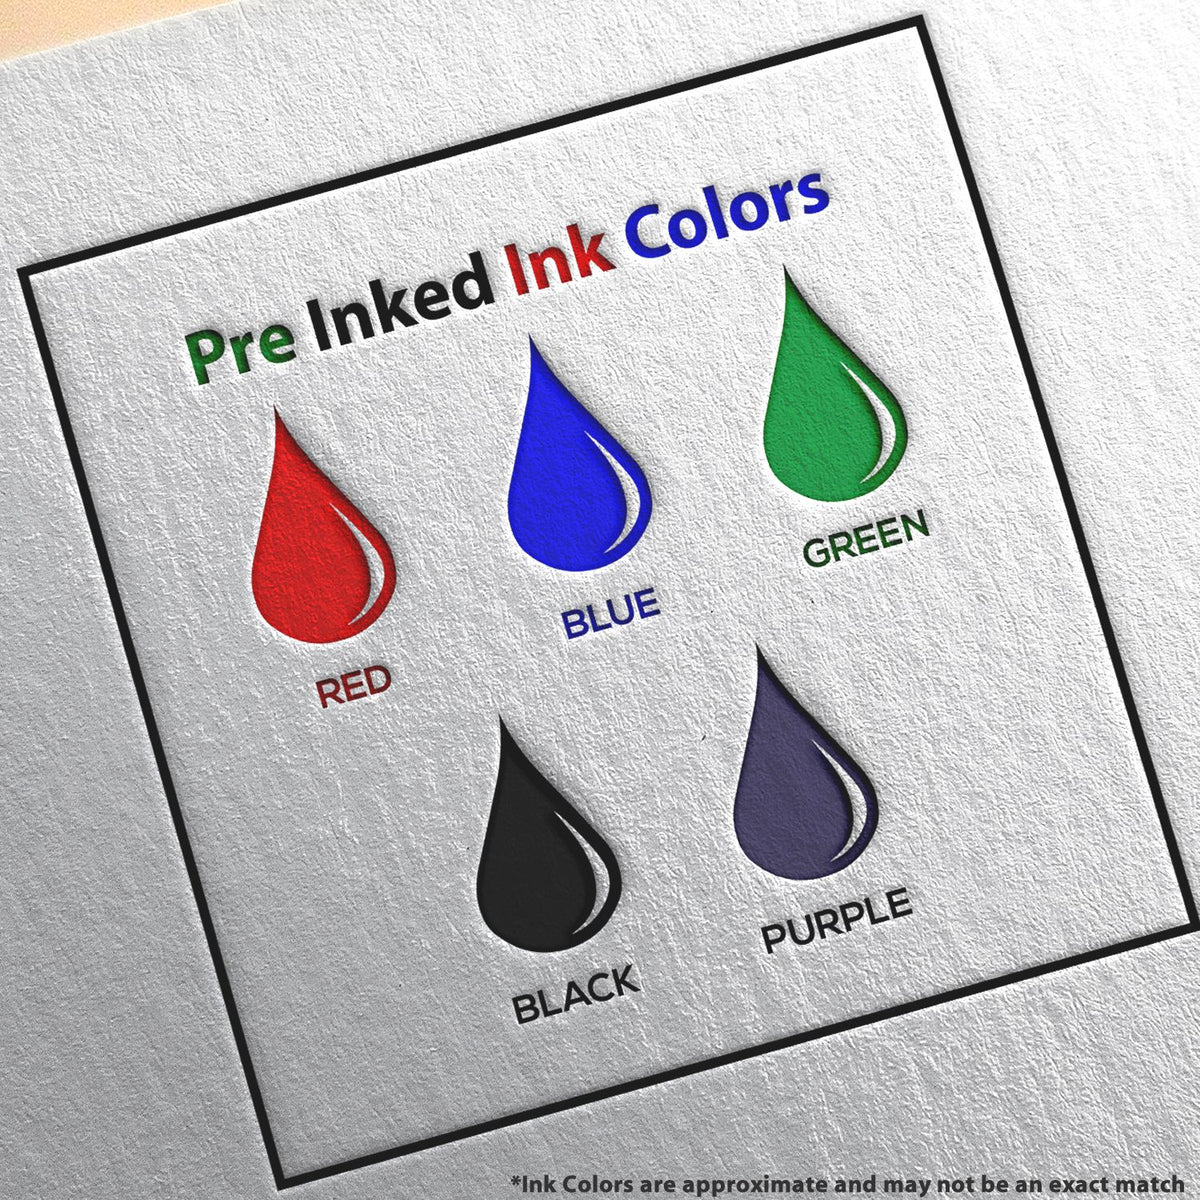 A picture showing the different ink colors or hues available for the Super Slim Texas Notary Public Stamp product.